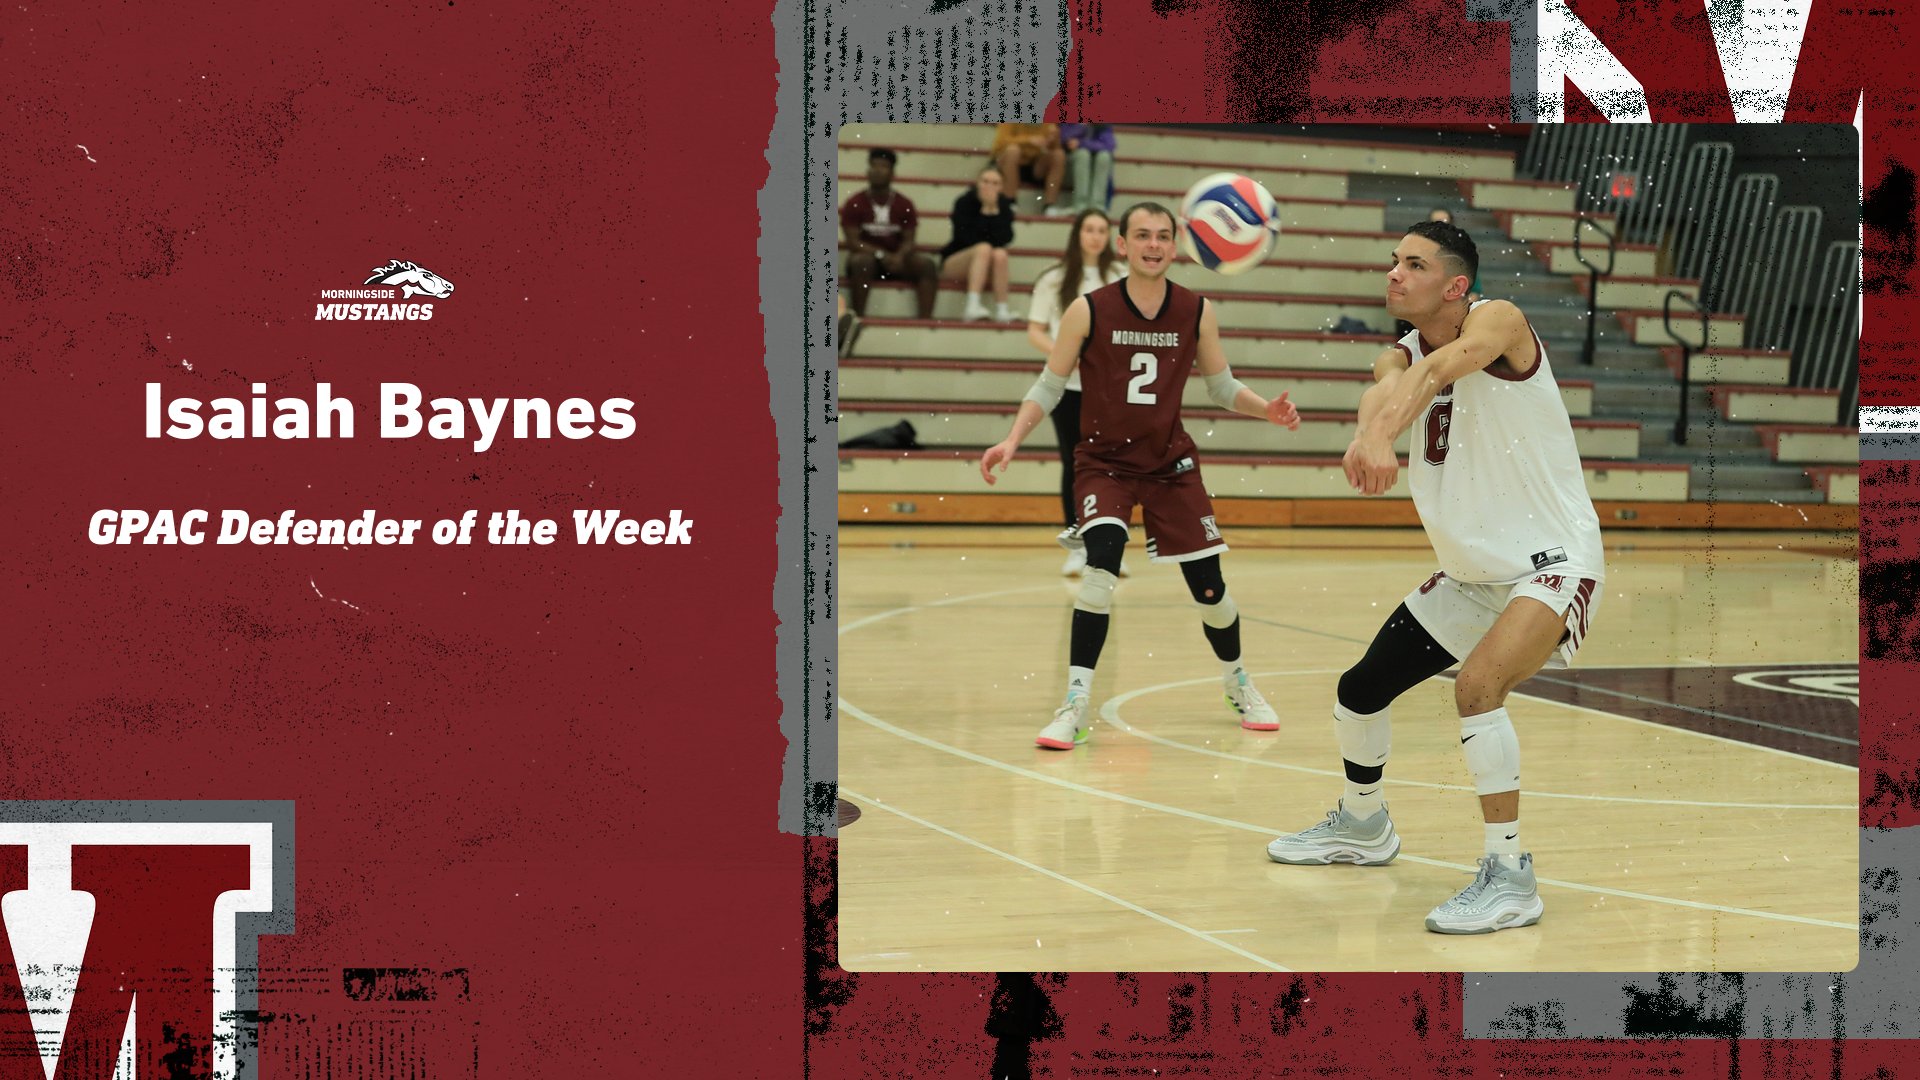 Baynes does it all to win GPAC Defender of the Week